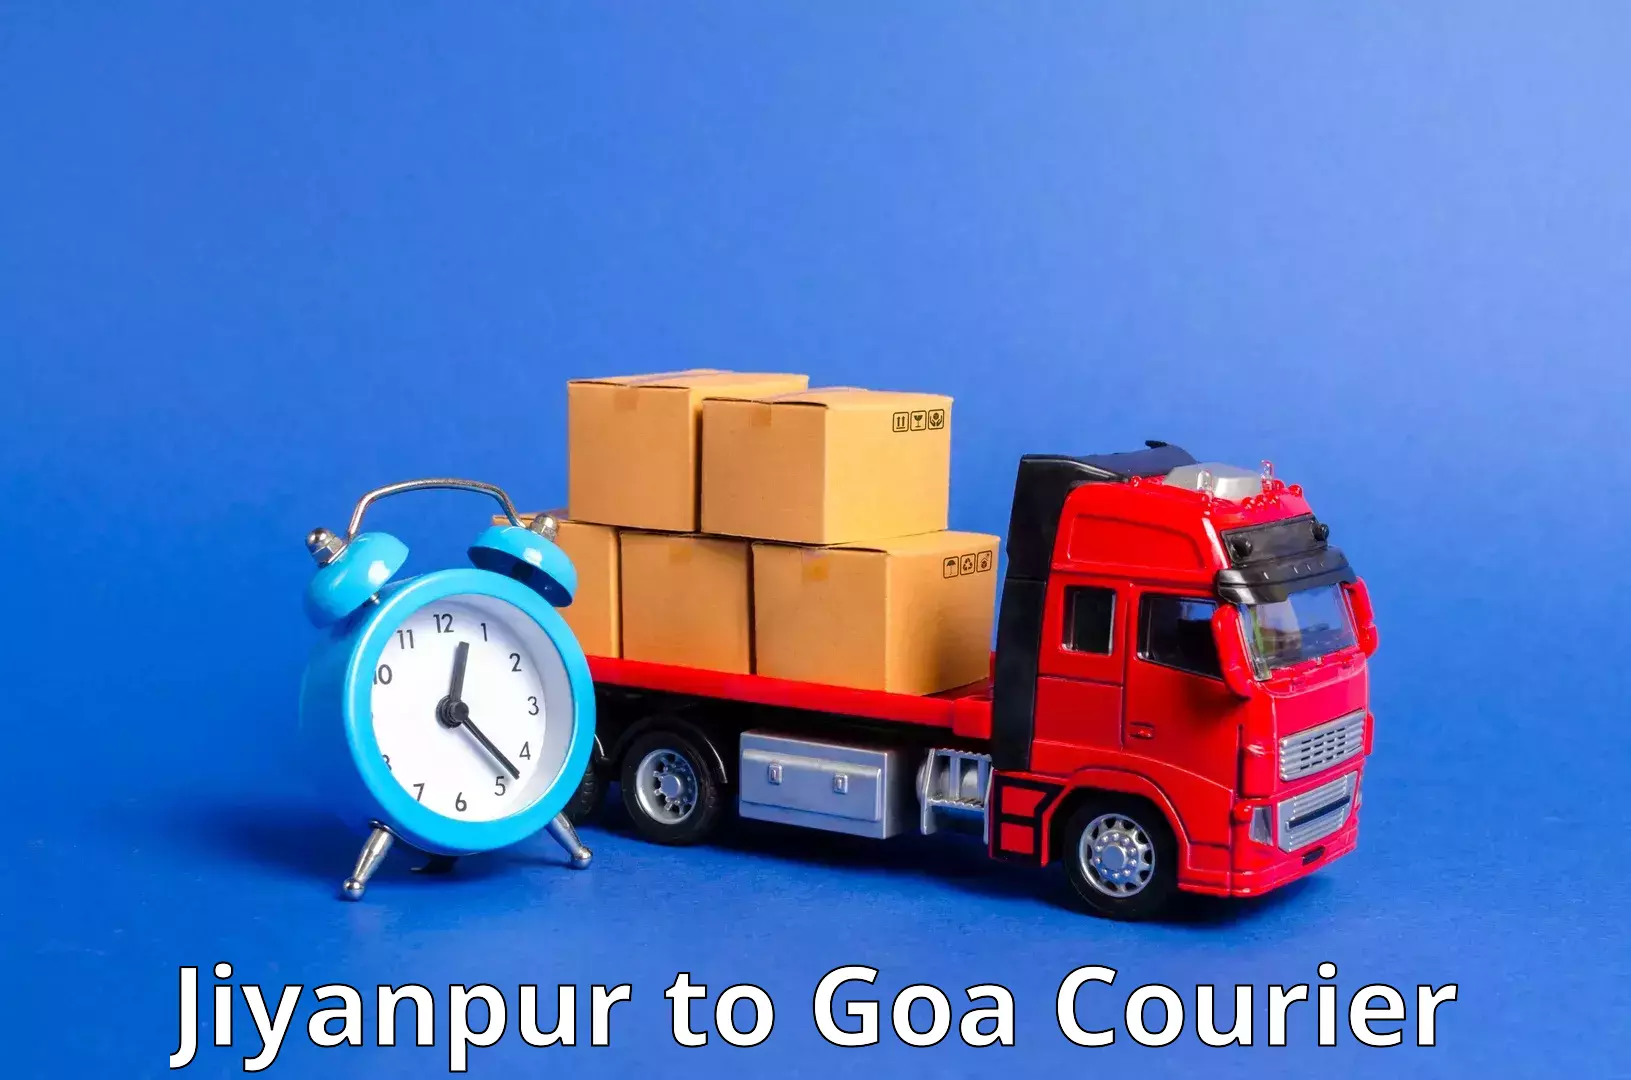 Courier rate comparison Jiyanpur to Panaji